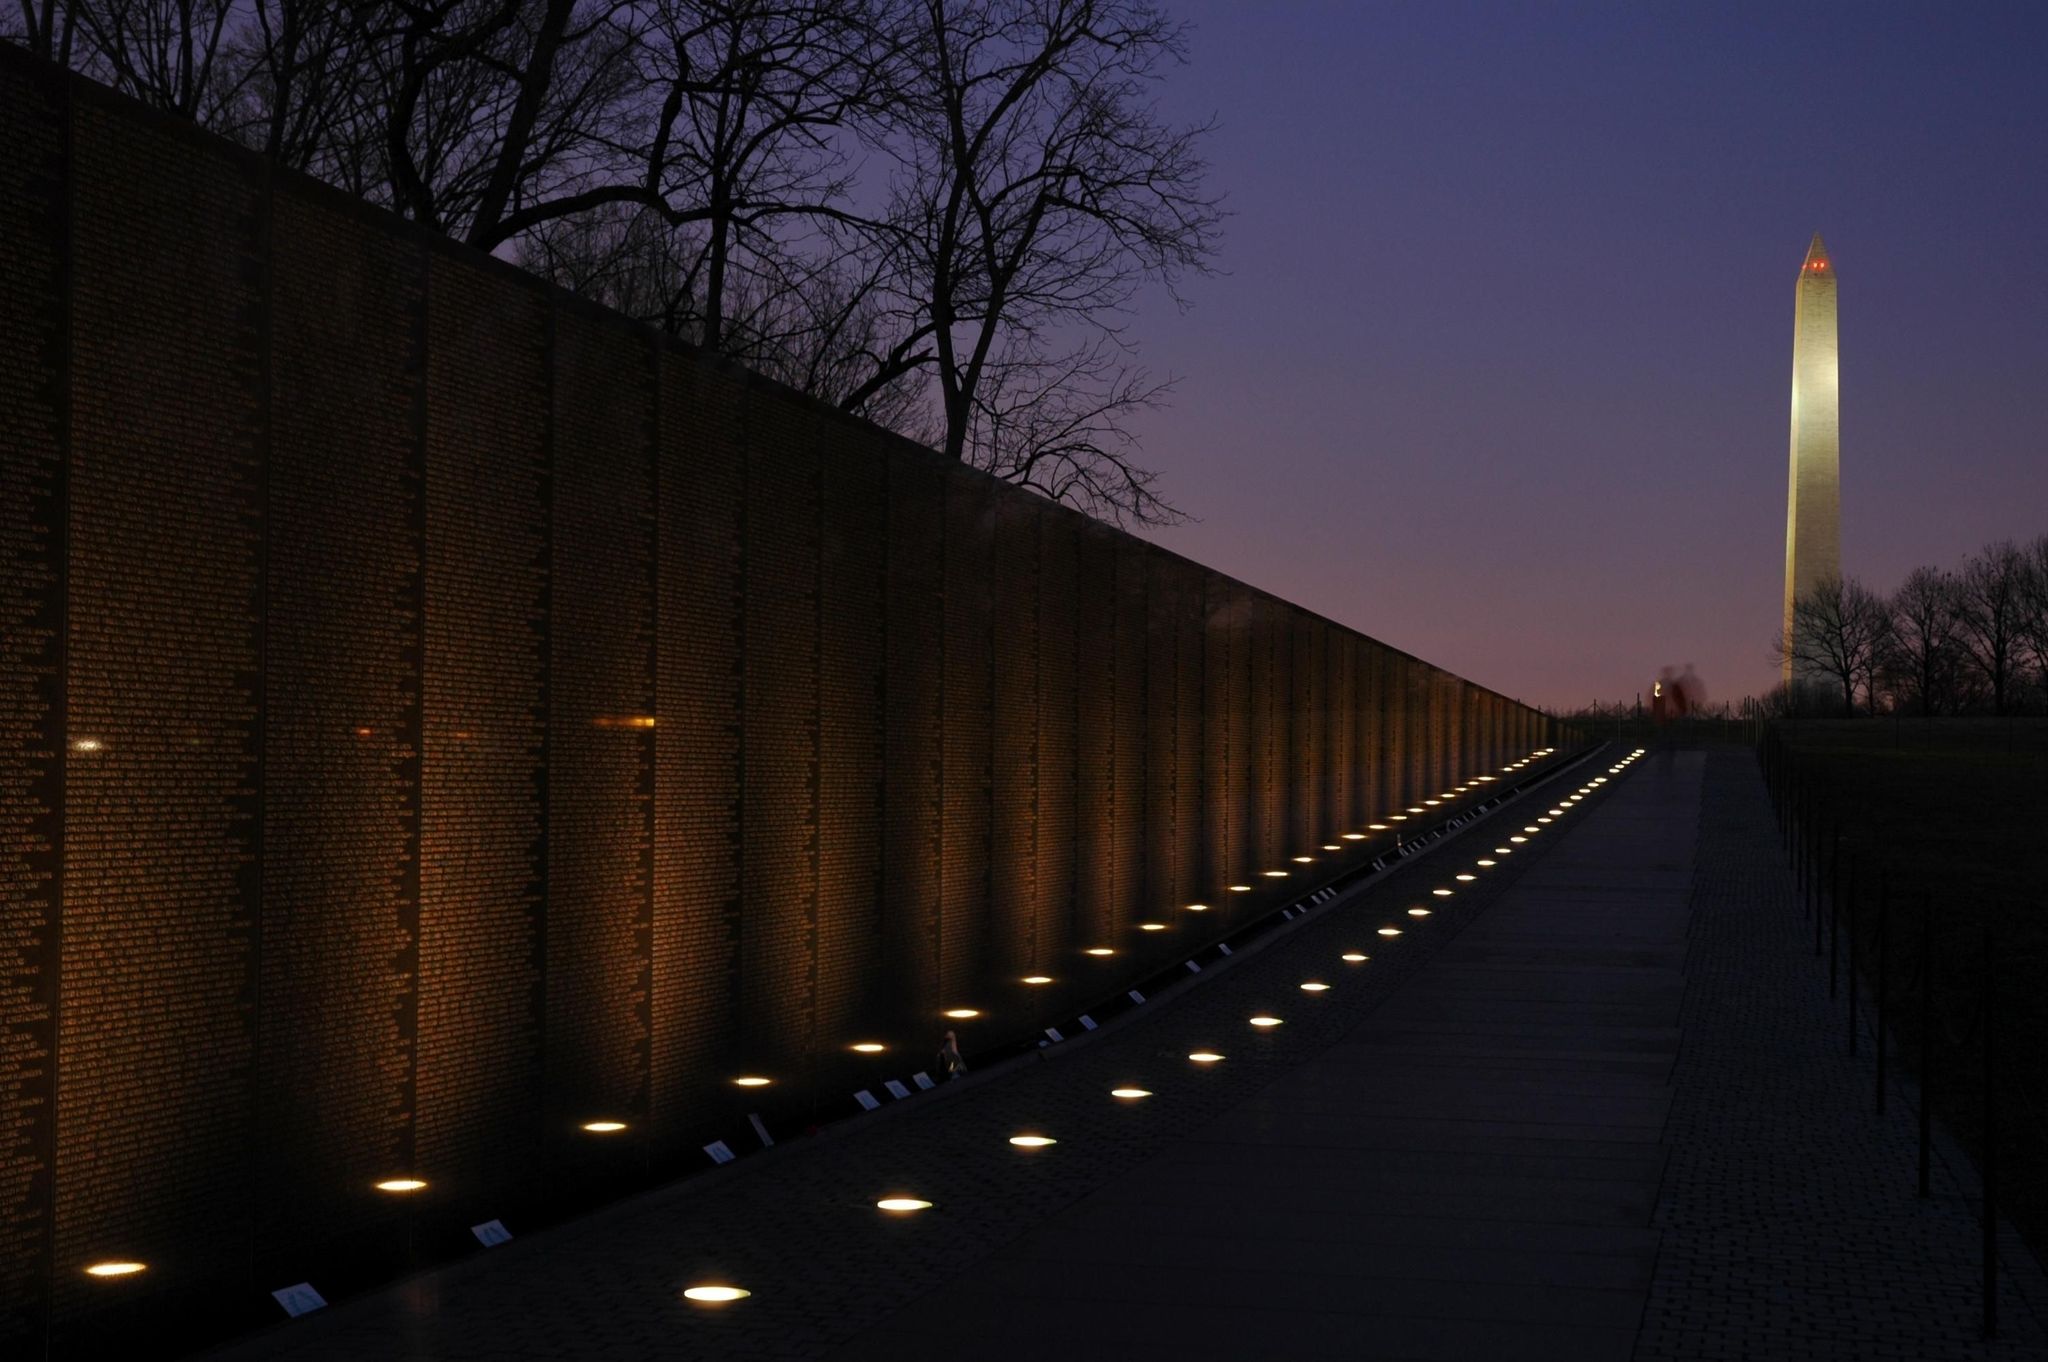 Visiting after dark completely changes the character of the memorial.